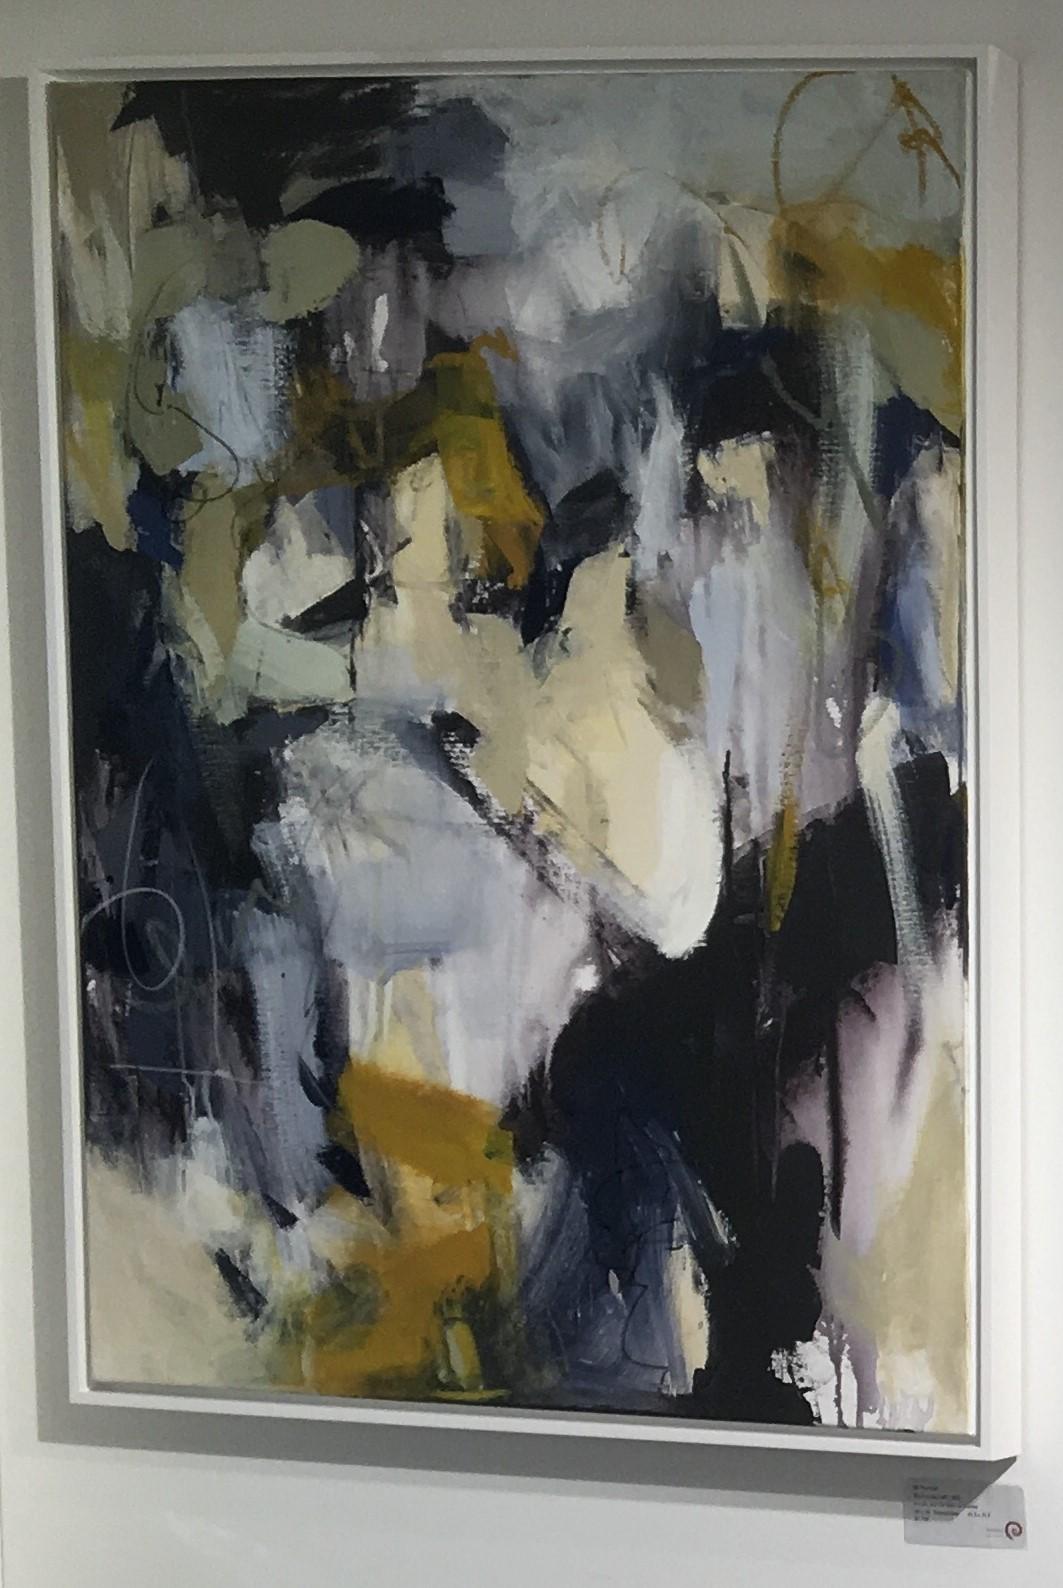 Bend to the Left is an abstract painting filled with blue, white and yellow by Australian artist, Jill Morton.  It is 40 x 30, acrylic and oil stick on canvas.  It is framed with a white float frame.

According to Morton, 